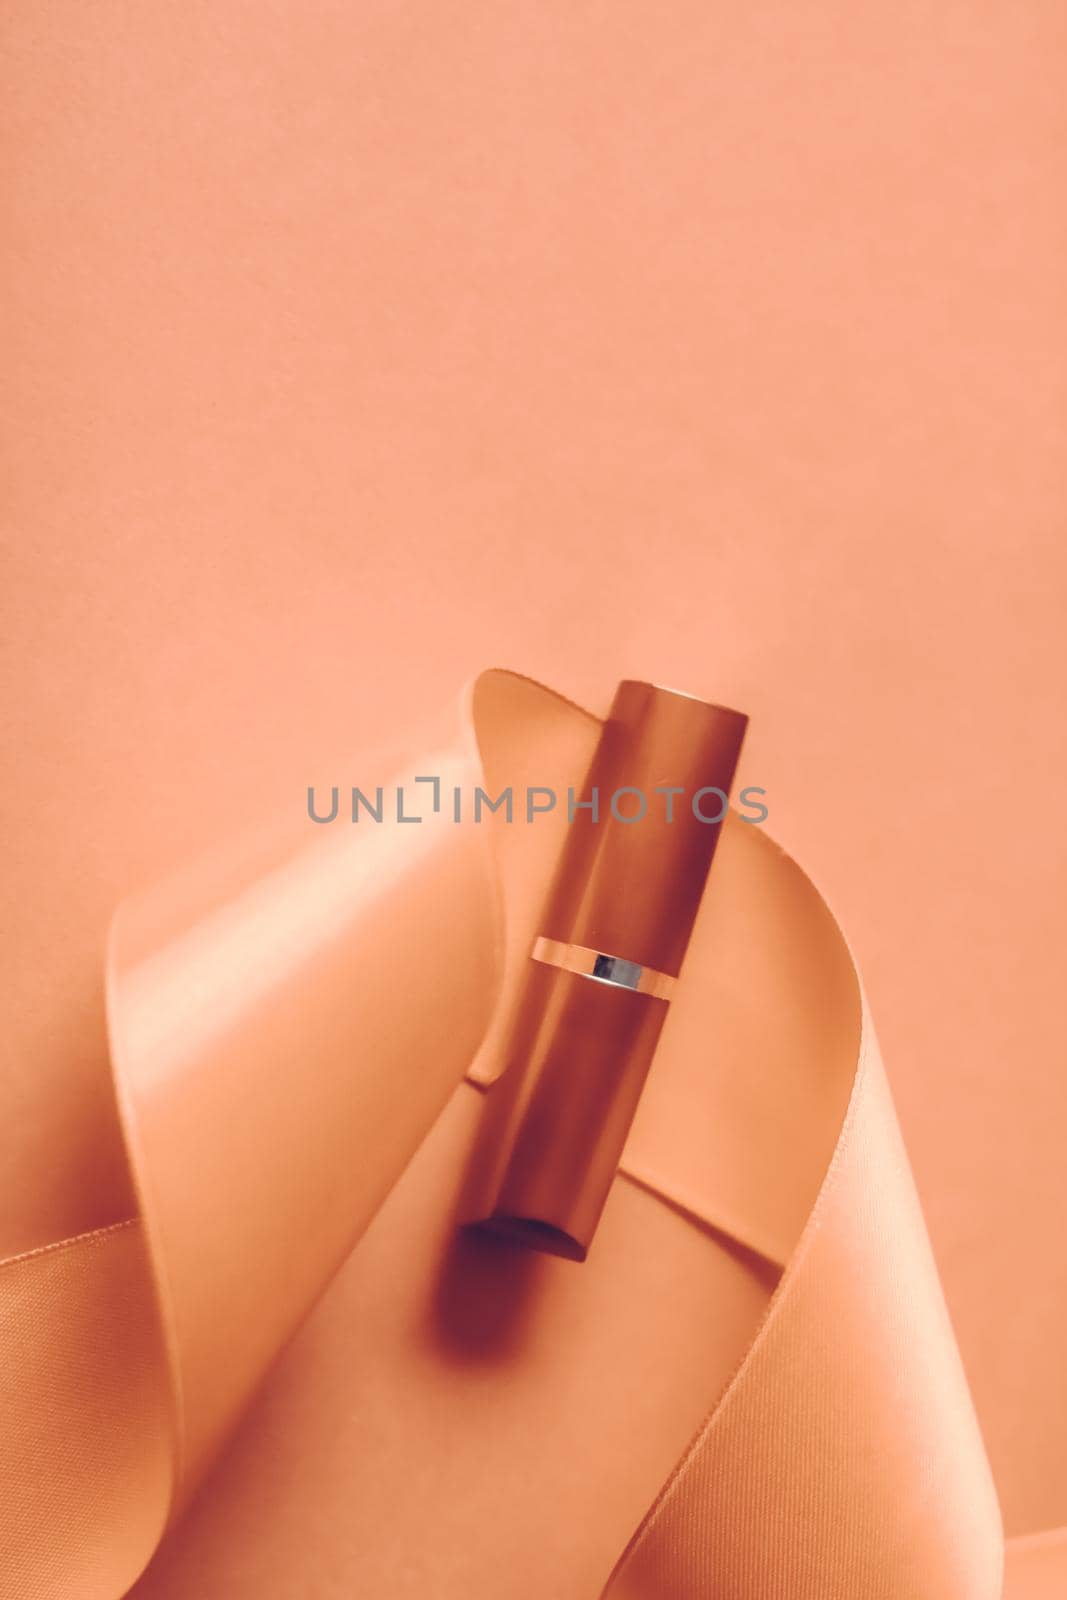 Cosmetic branding, glamour lip gloss and shopping sale concept - Luxury lipstick and silk ribbon on orange holiday background, make-up and cosmetics flatlay for beauty brand product design